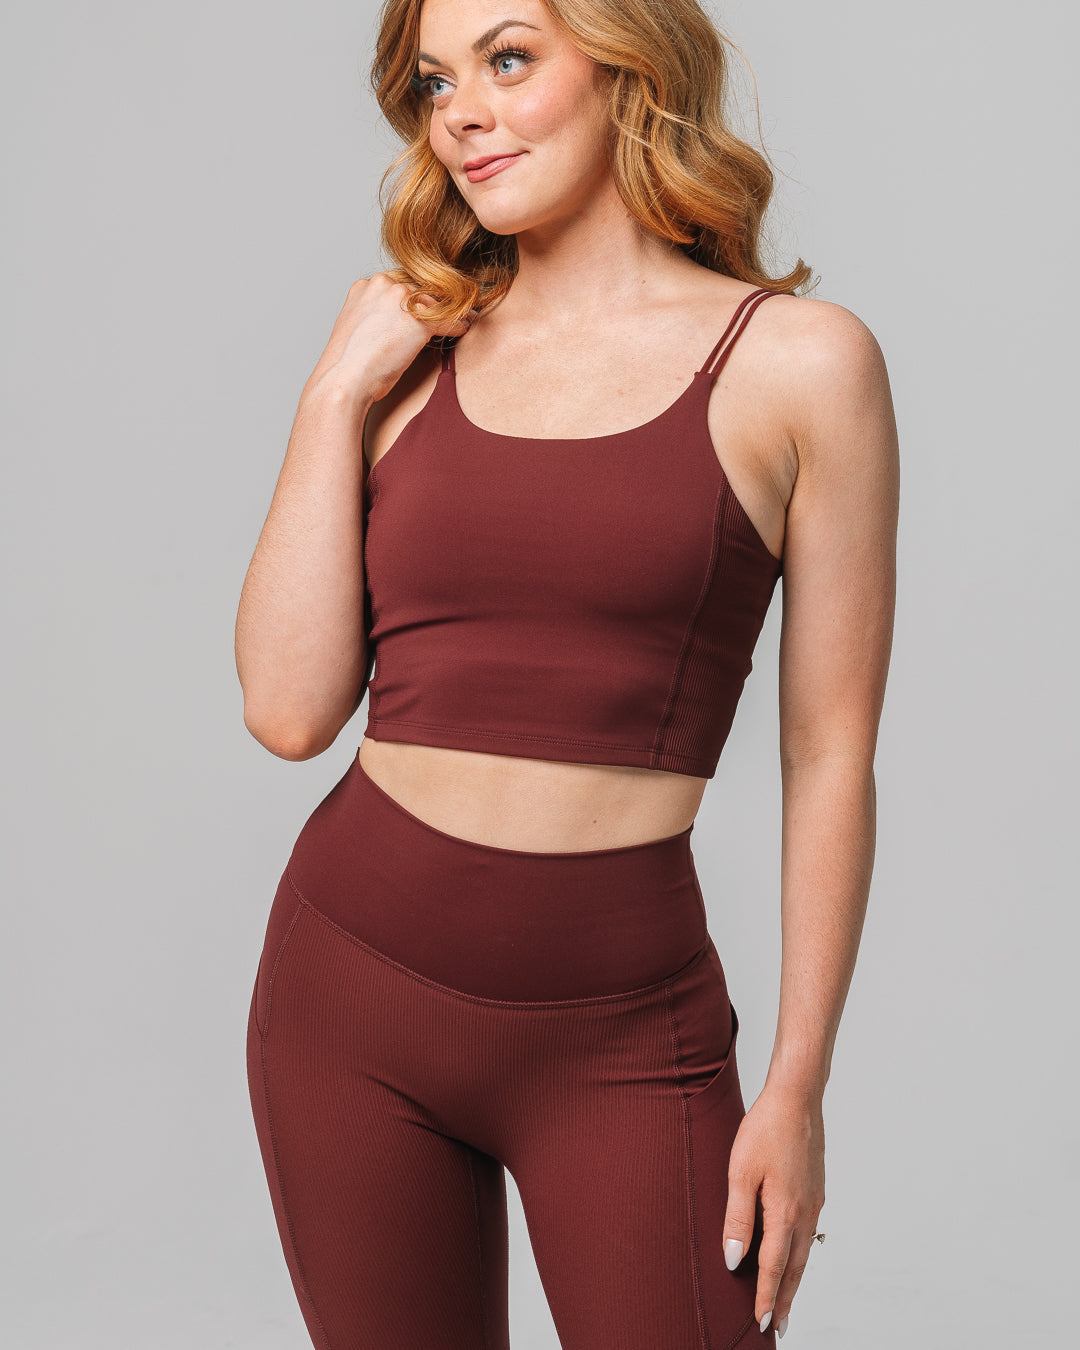 KADYLUXE® womens countess cami bra in color maroon front view.